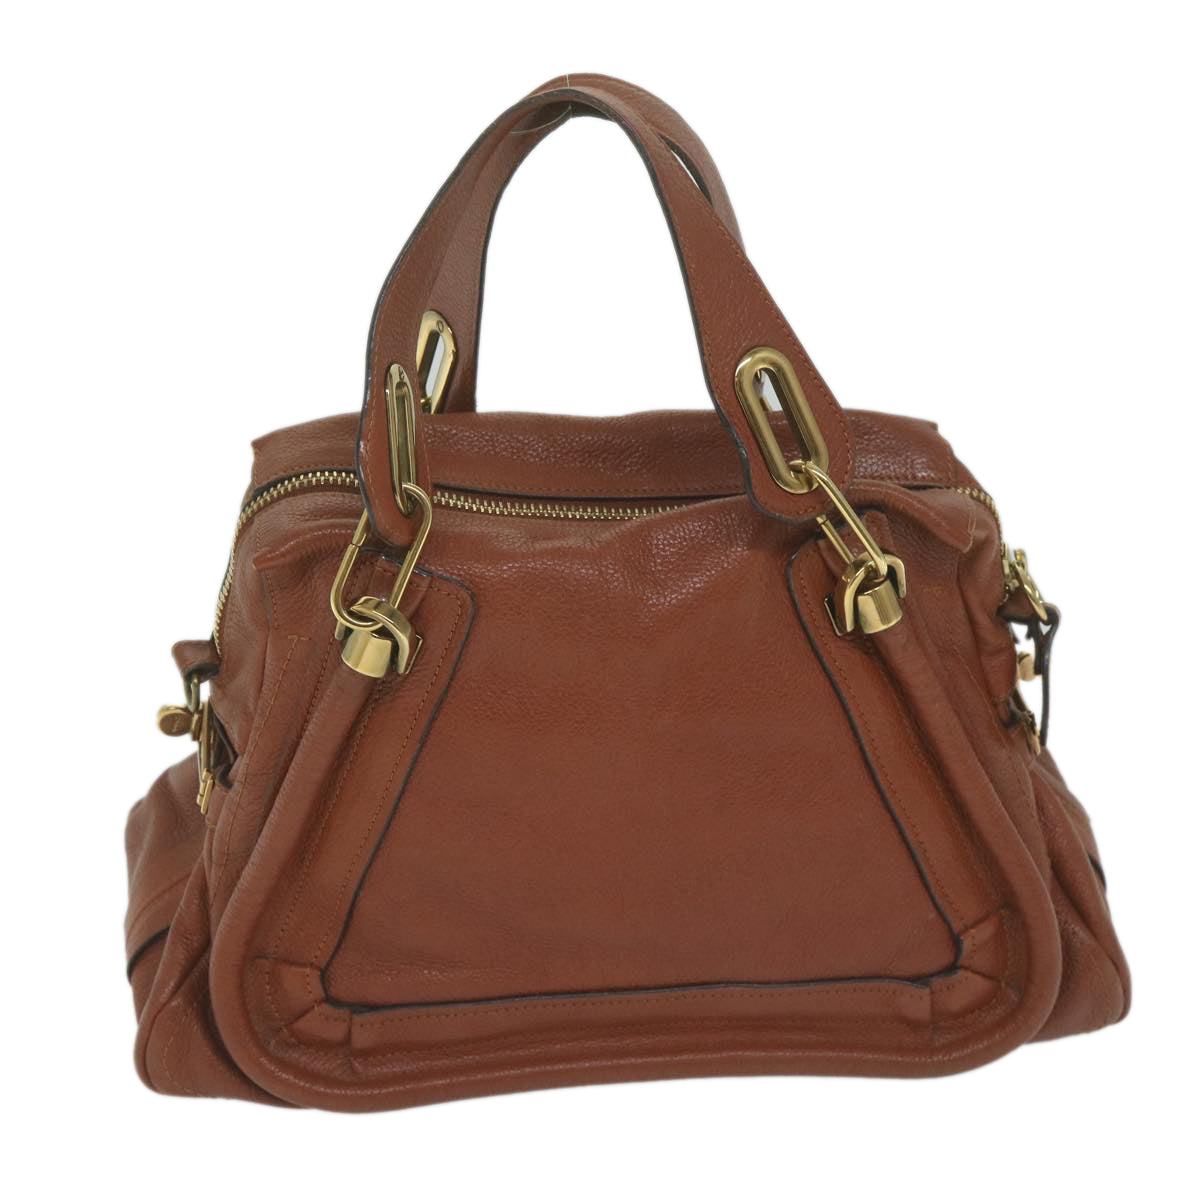 Chloe Paraty Hand Bag Leather Brown Auth yk10020 - 0